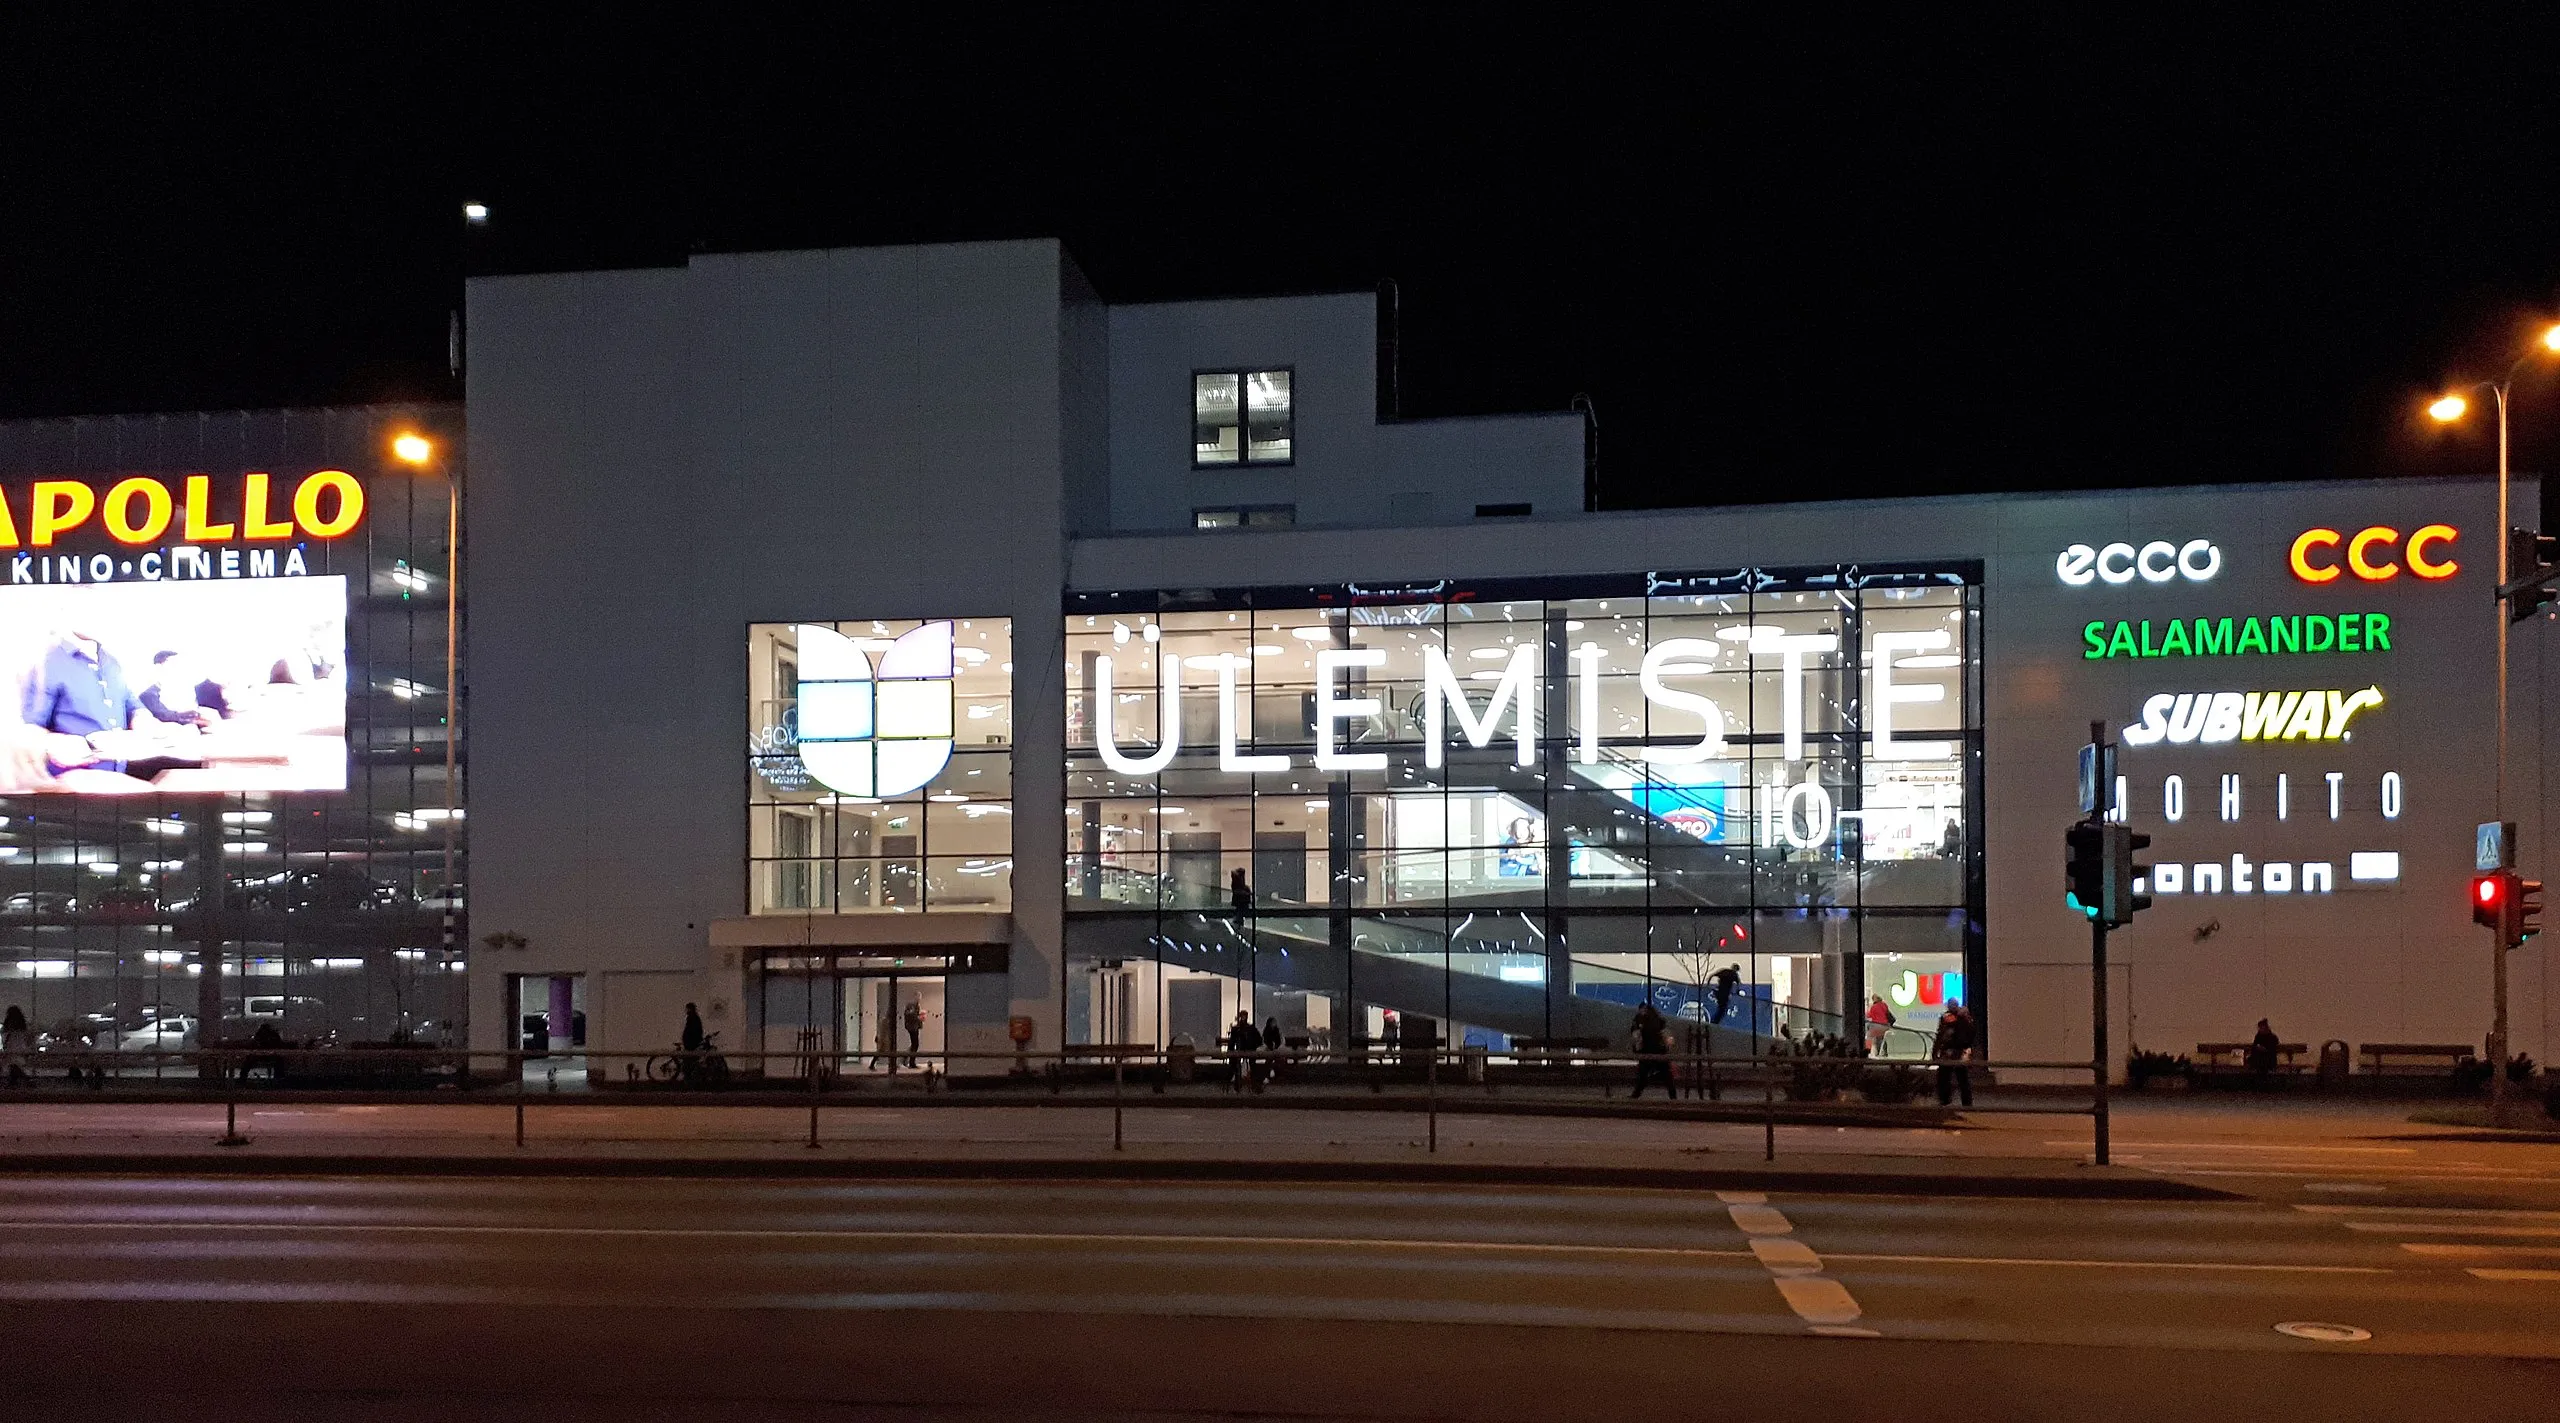 Ulemiste Center in Estonia, europe | Handbags,Shoes,Accessories,Clothes,Gifts,Sportswear,Travel Bags,Jewelry,Swimwear - Country Helper